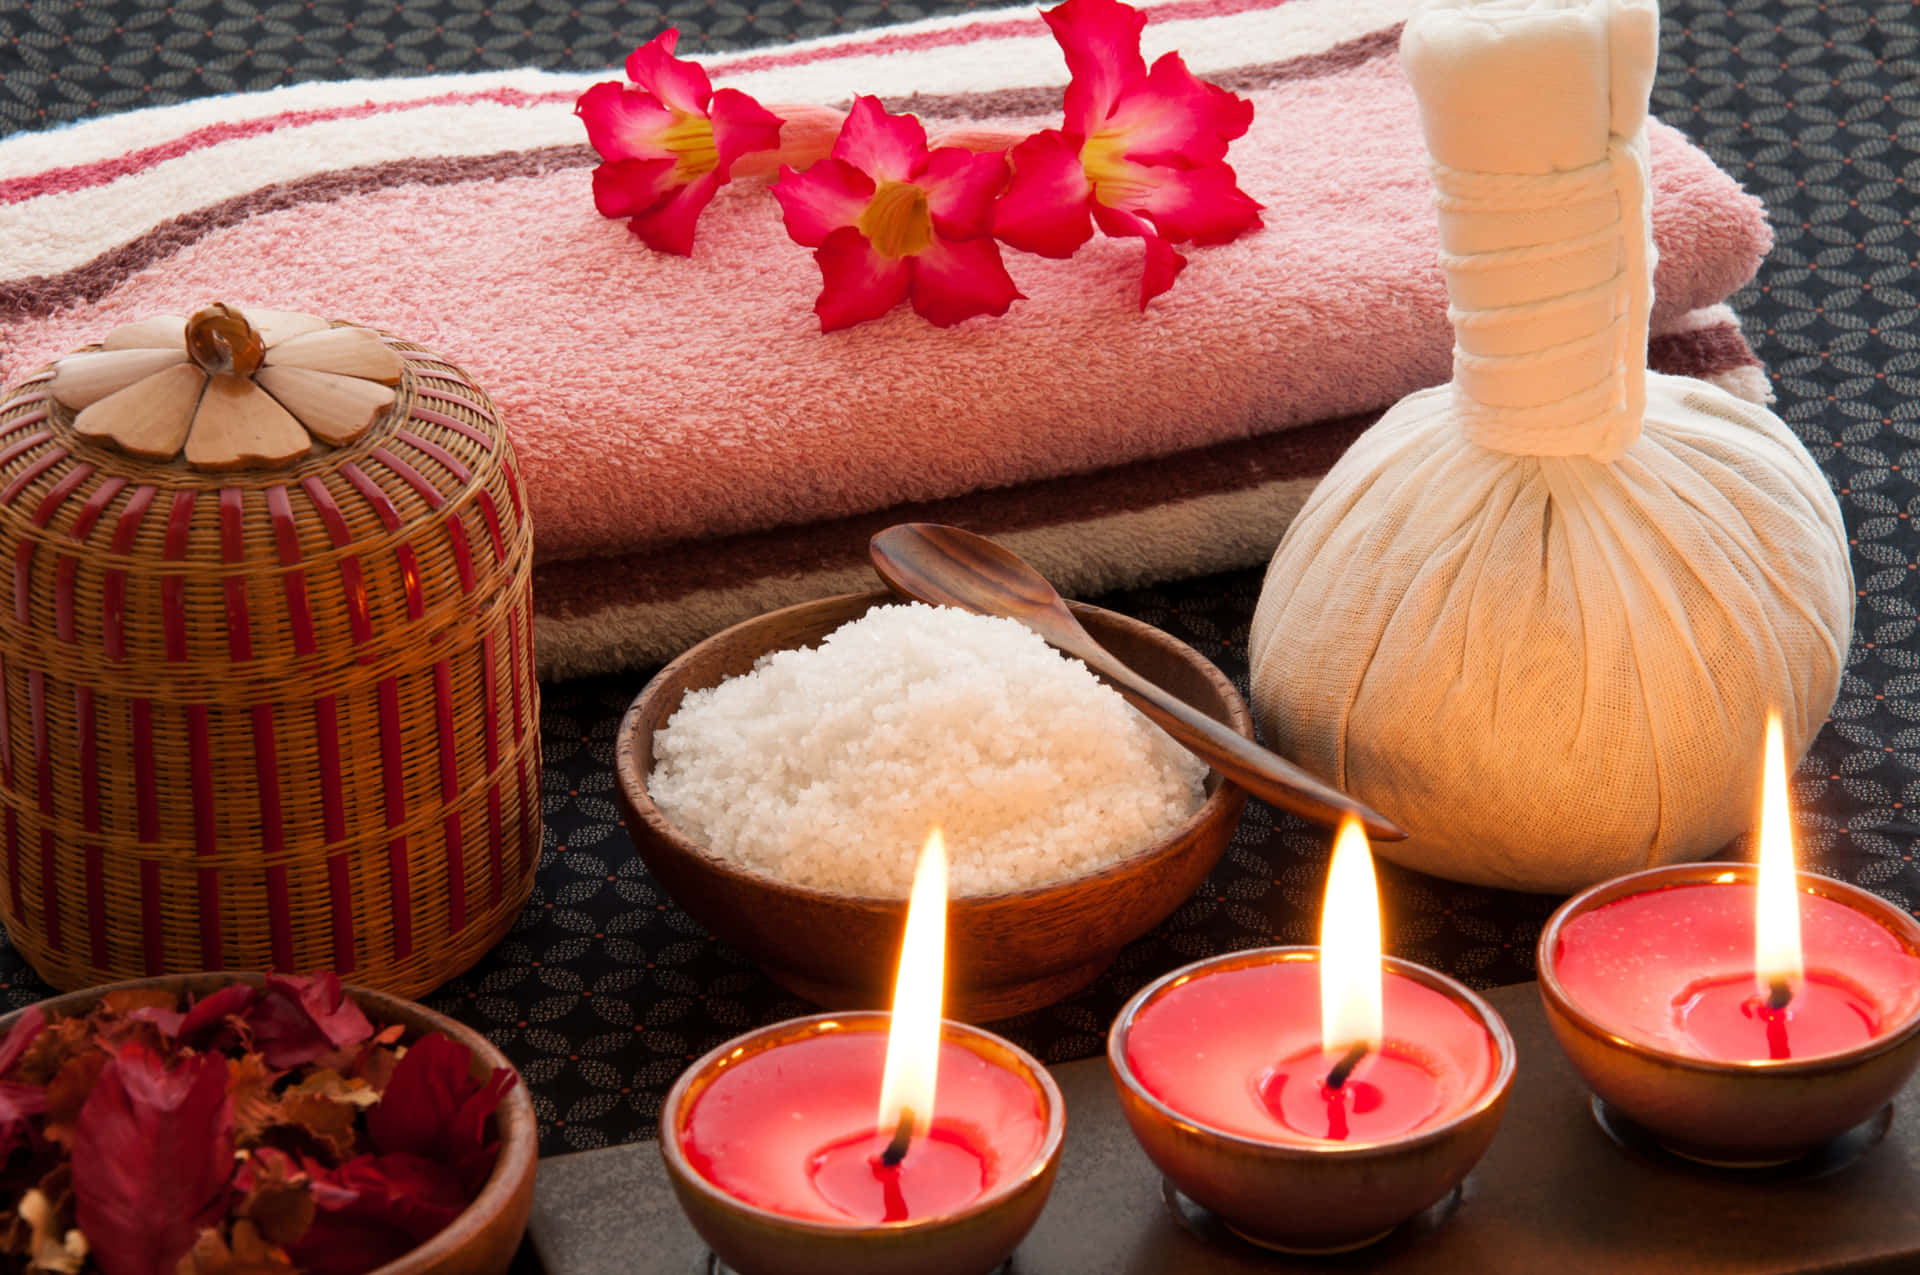 Relax and Rejuvenate with Spa Treatments Wallpaper